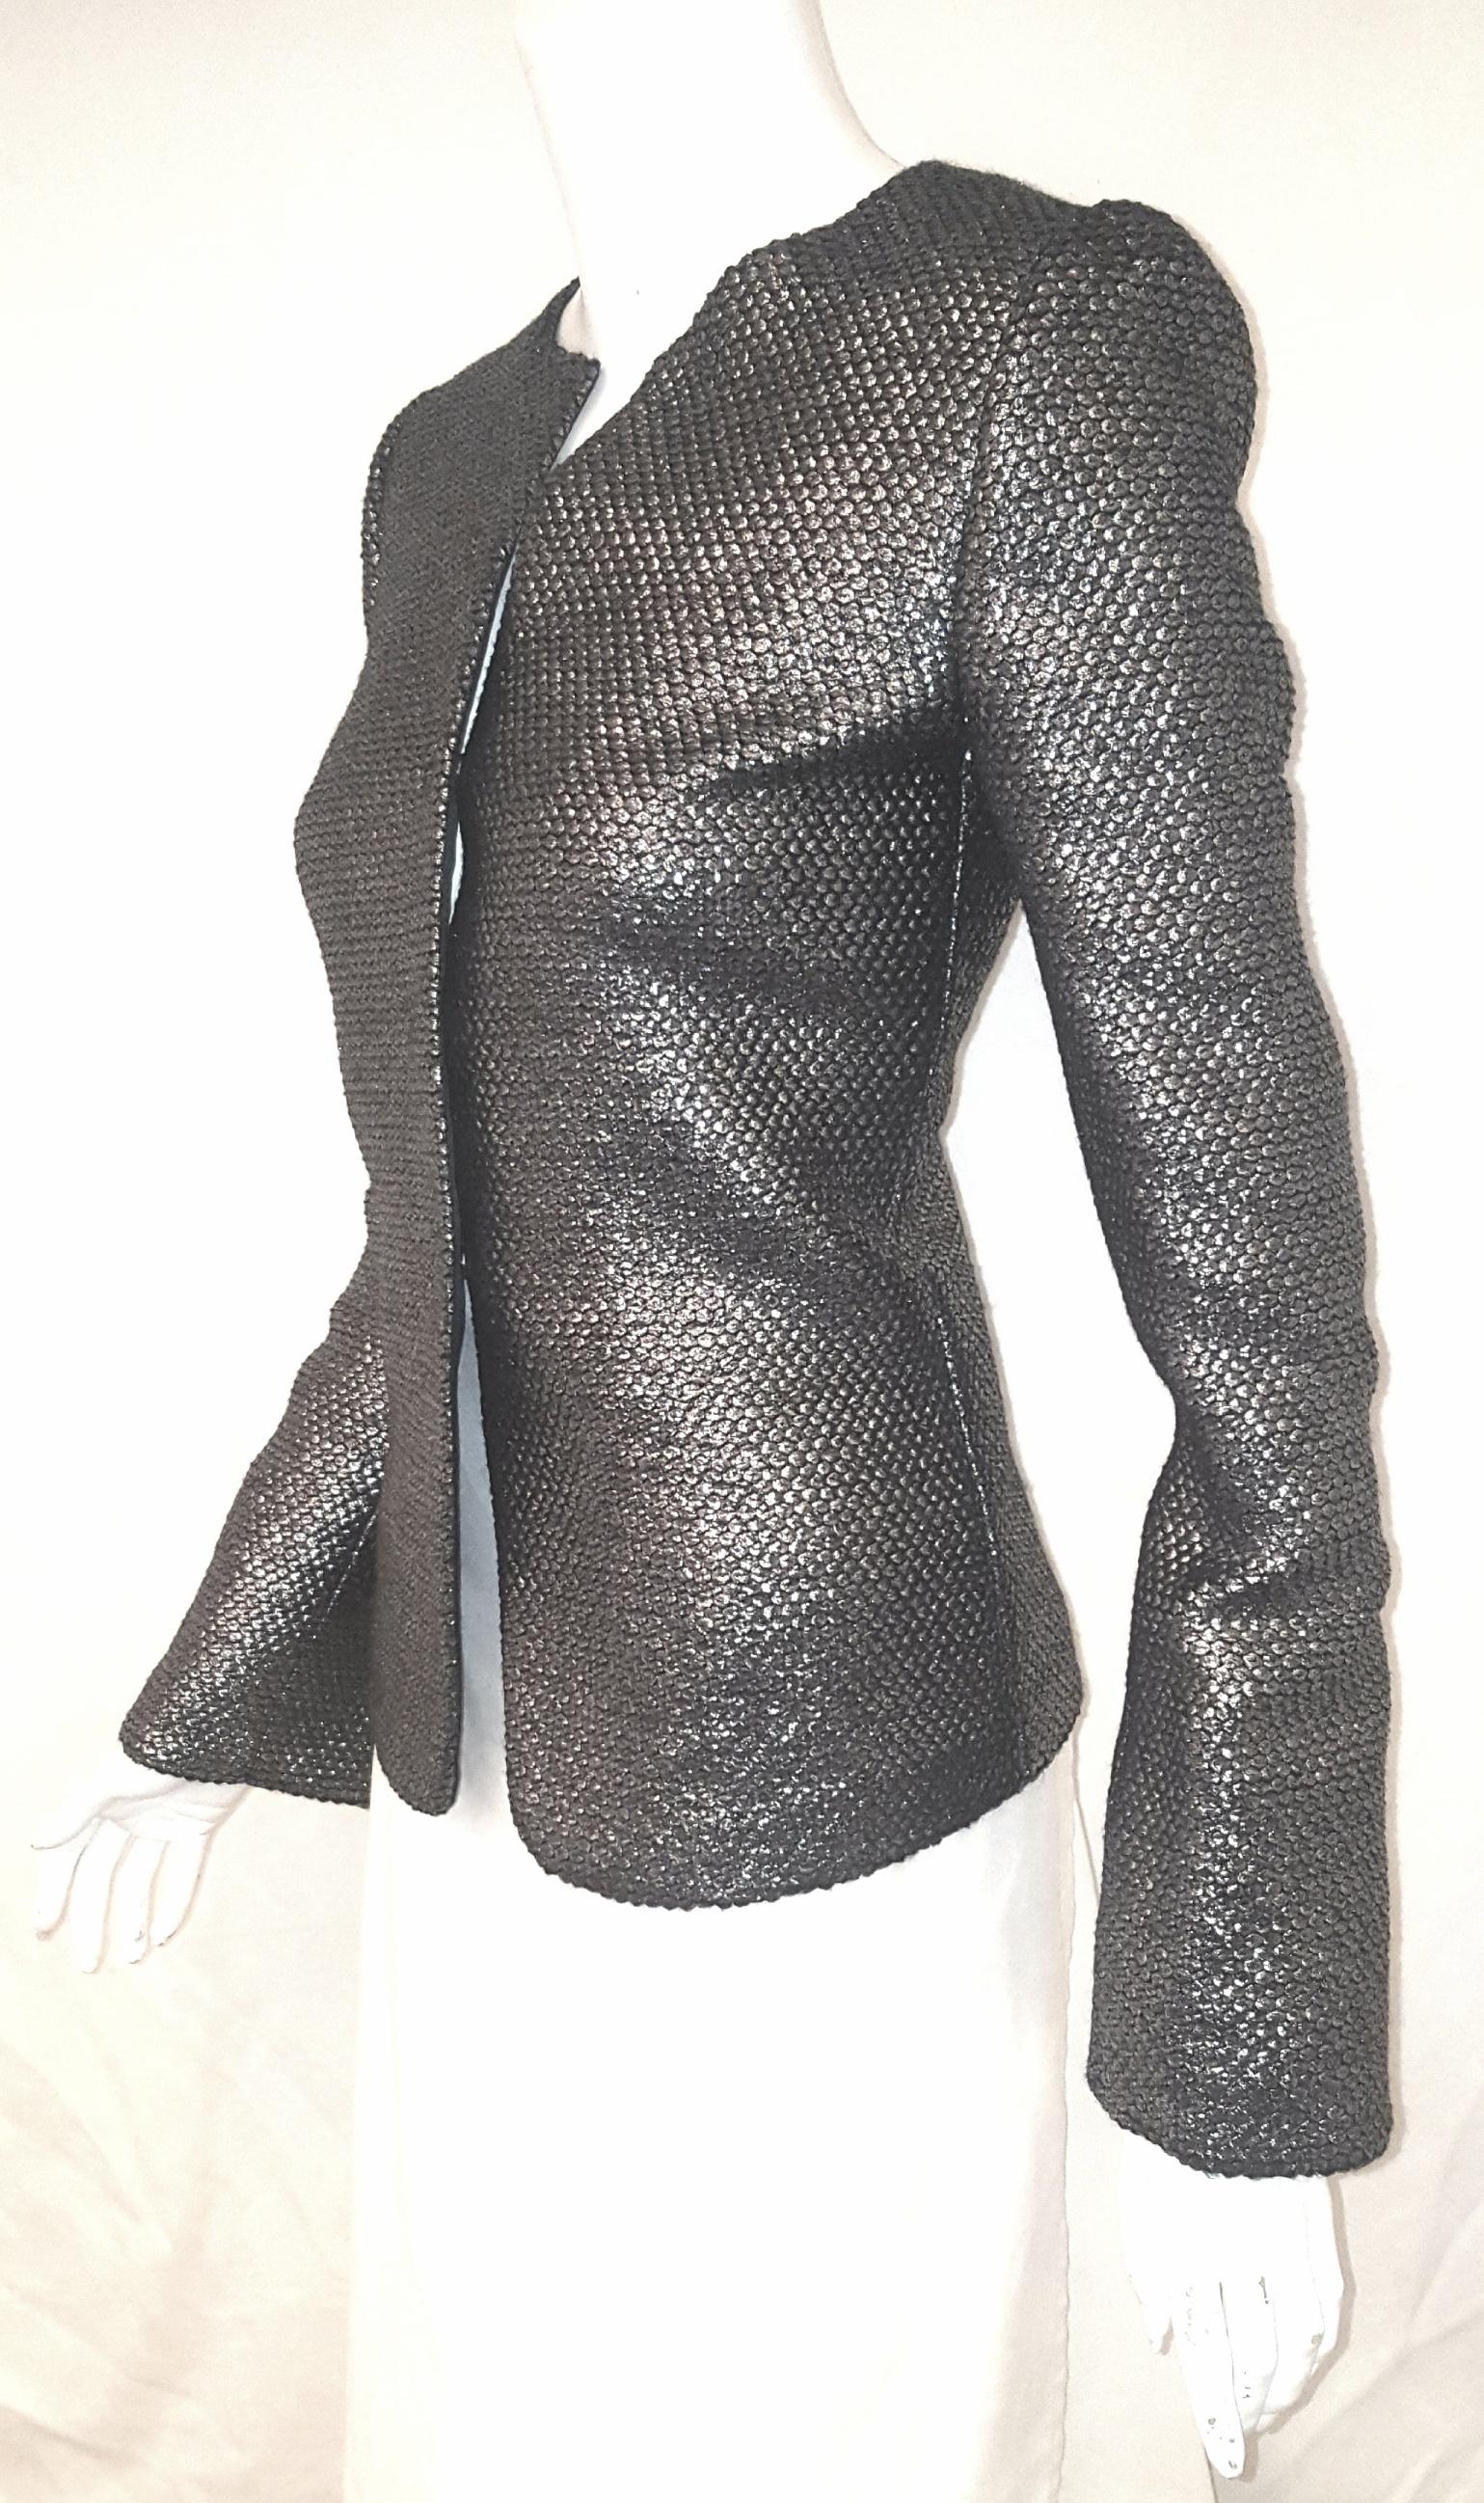 Armani Collezioni pewter tone honeycomb print brocade jacket can be worn with a LBD or with skinny pants.  This travel anywhere and anytime jacket is the perfect travel companion (wardrobe wise)!   This round neckline can be complemented with a